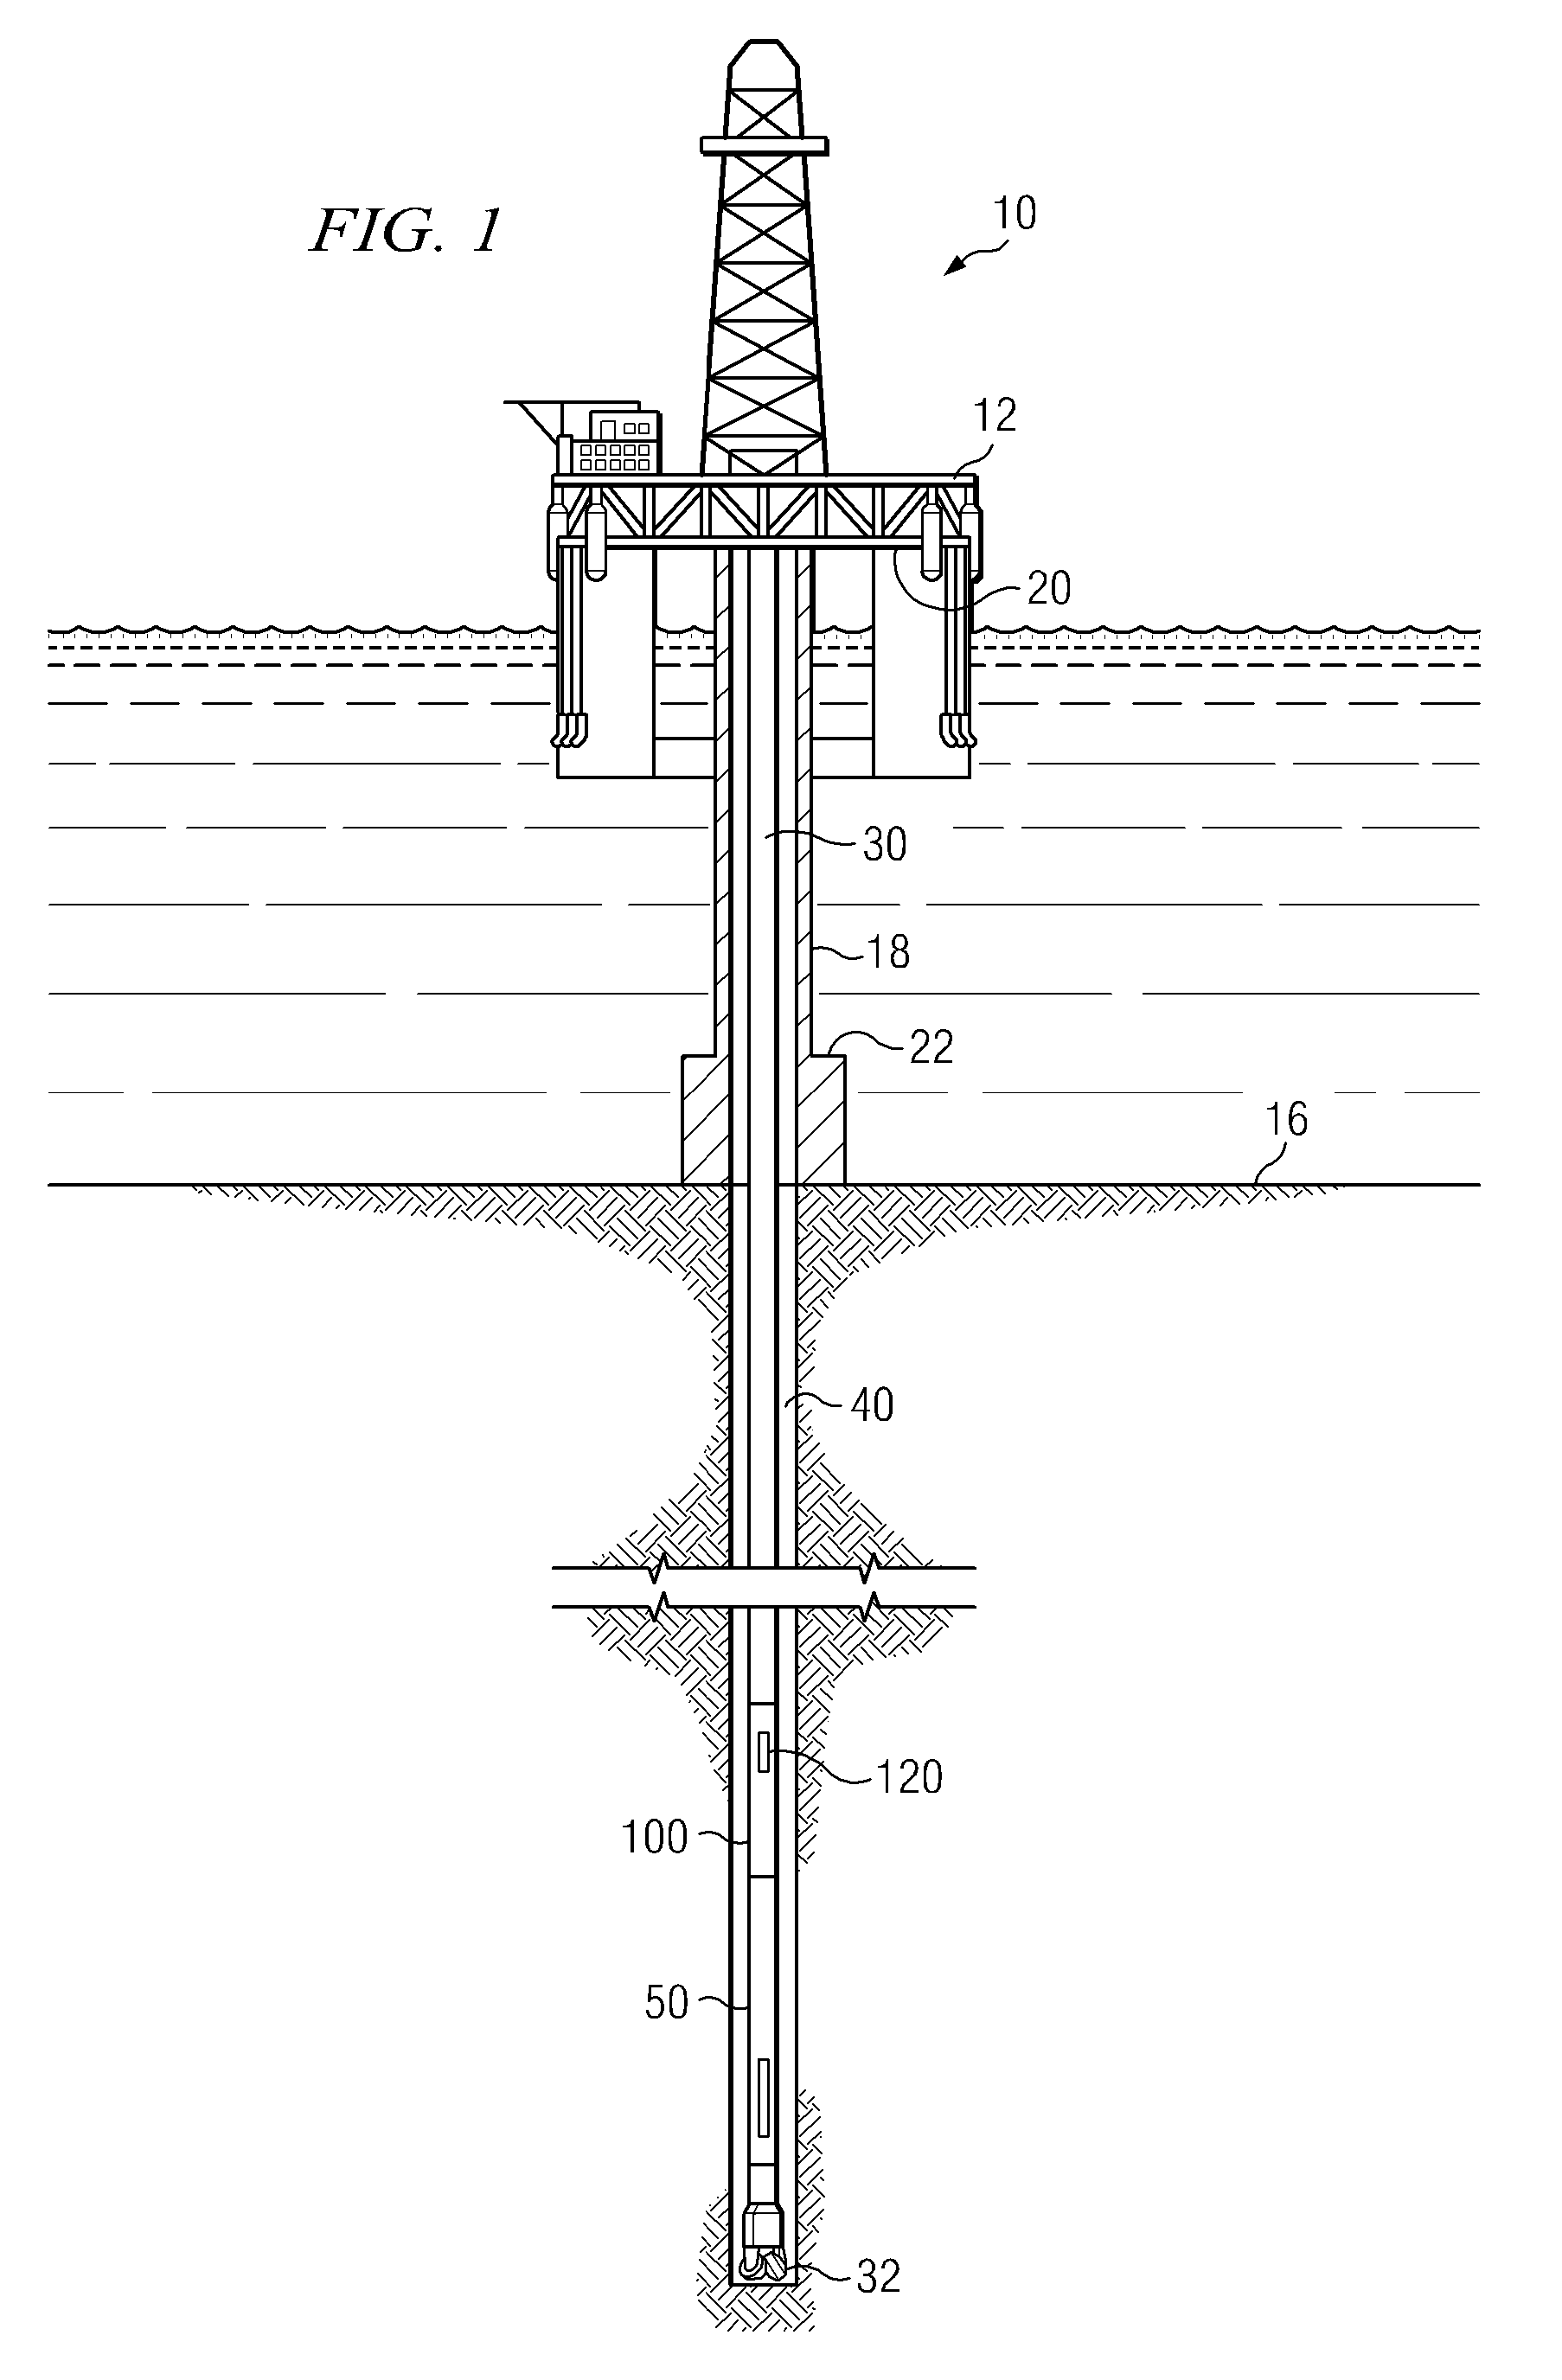 Downhole downlinking system employing a differential pressure transducer